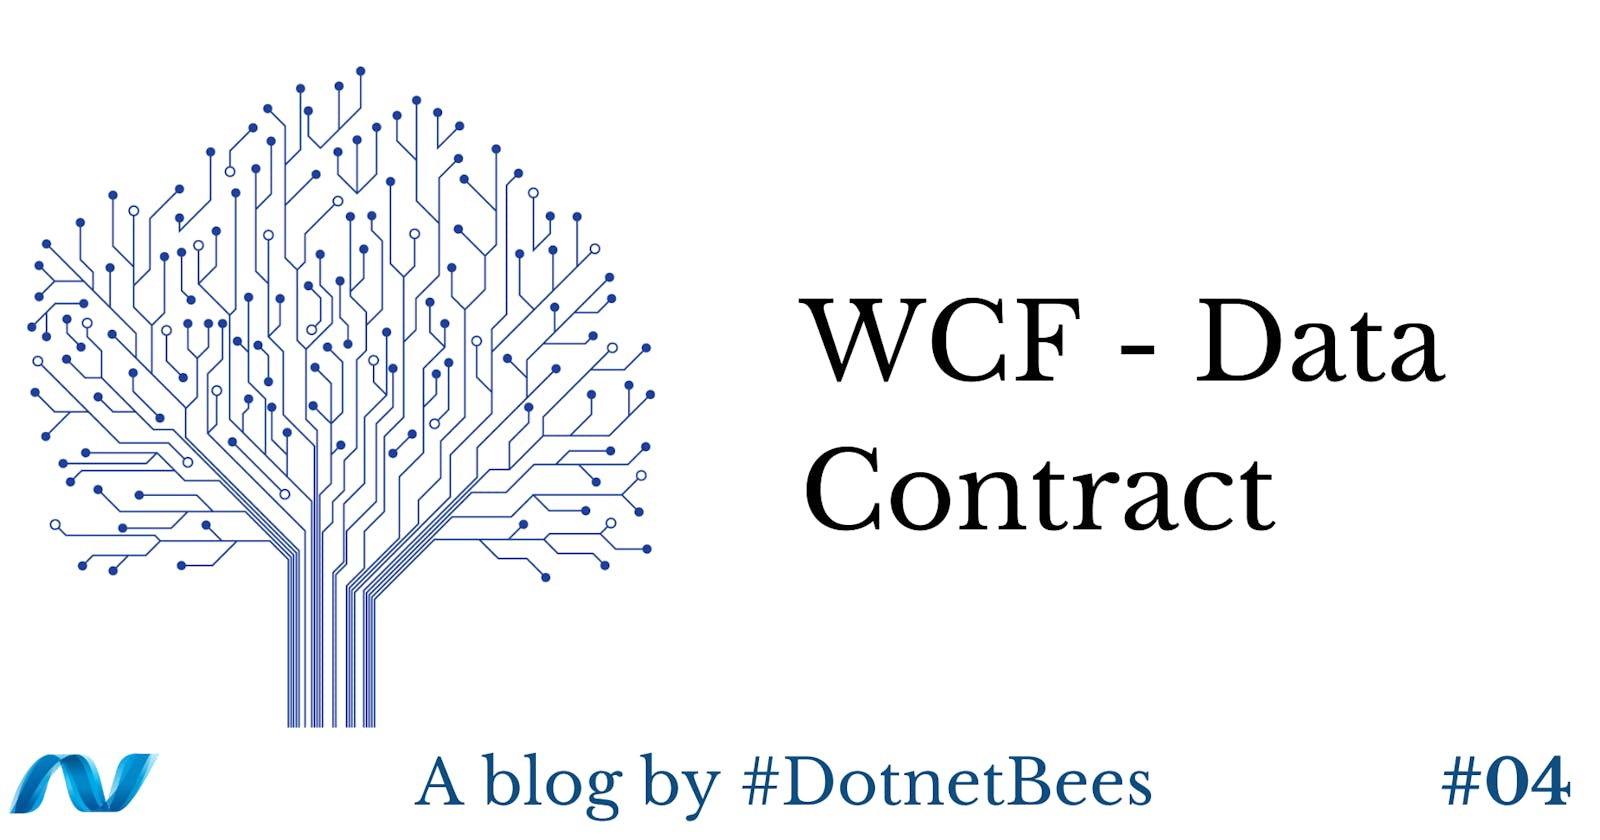 WCF - Data Contract